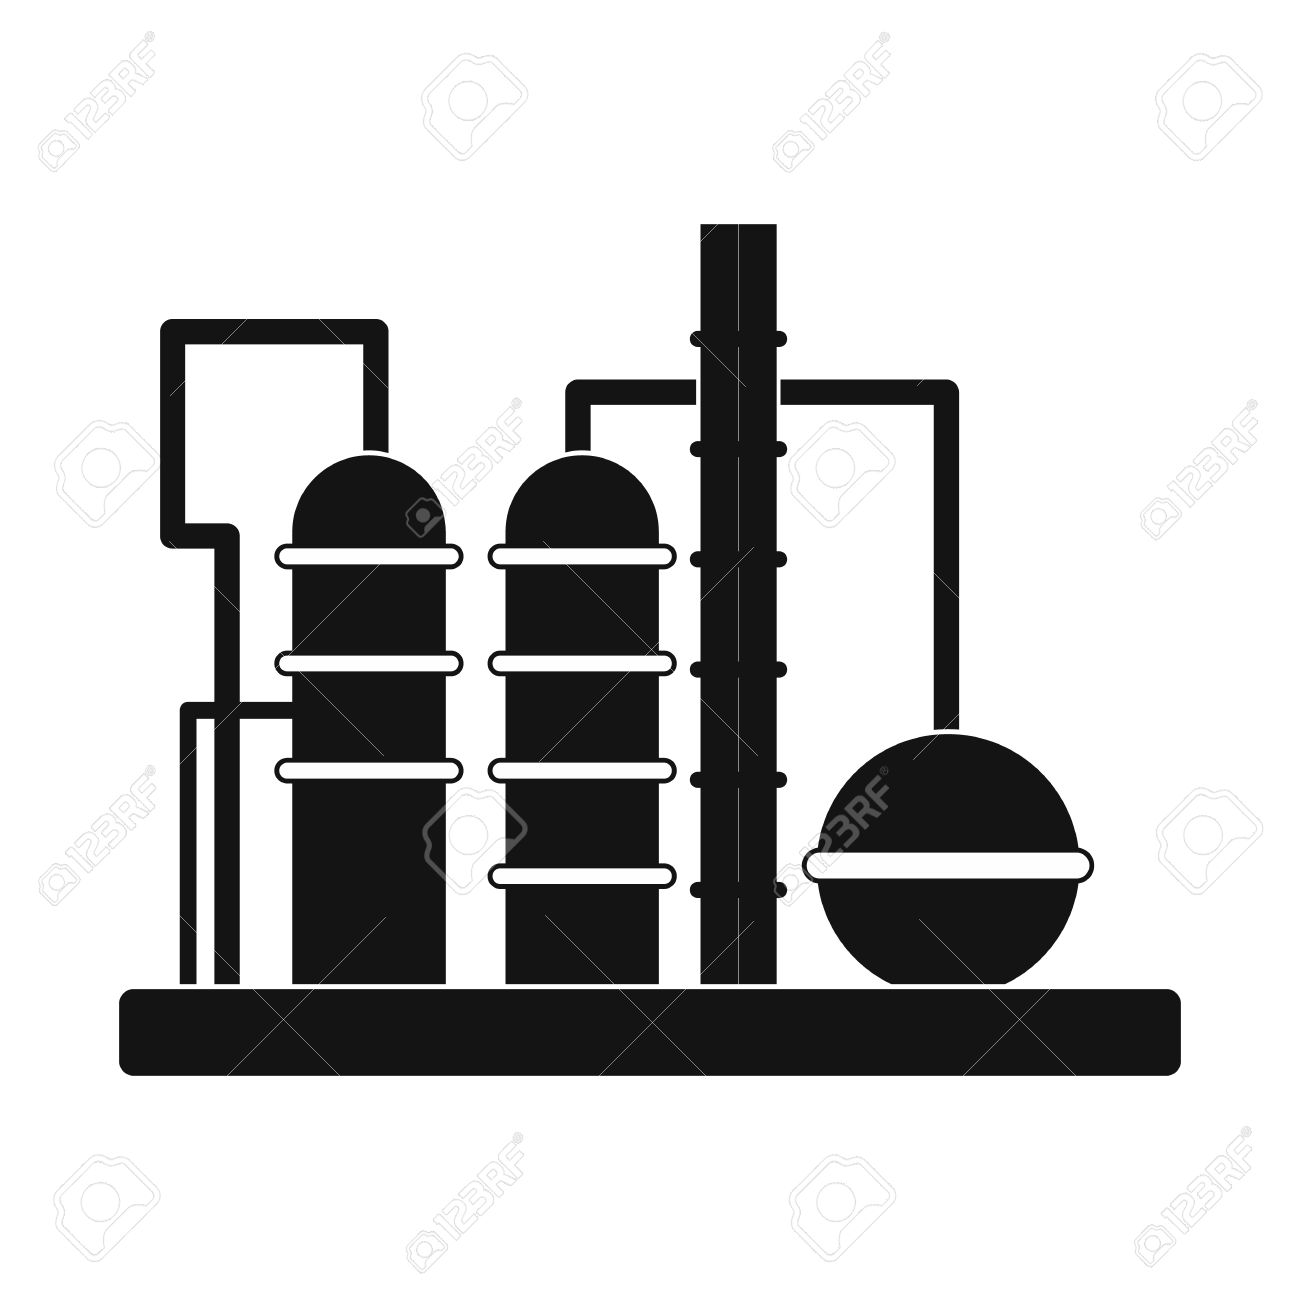 Oil Refinery Clipart Black And White.